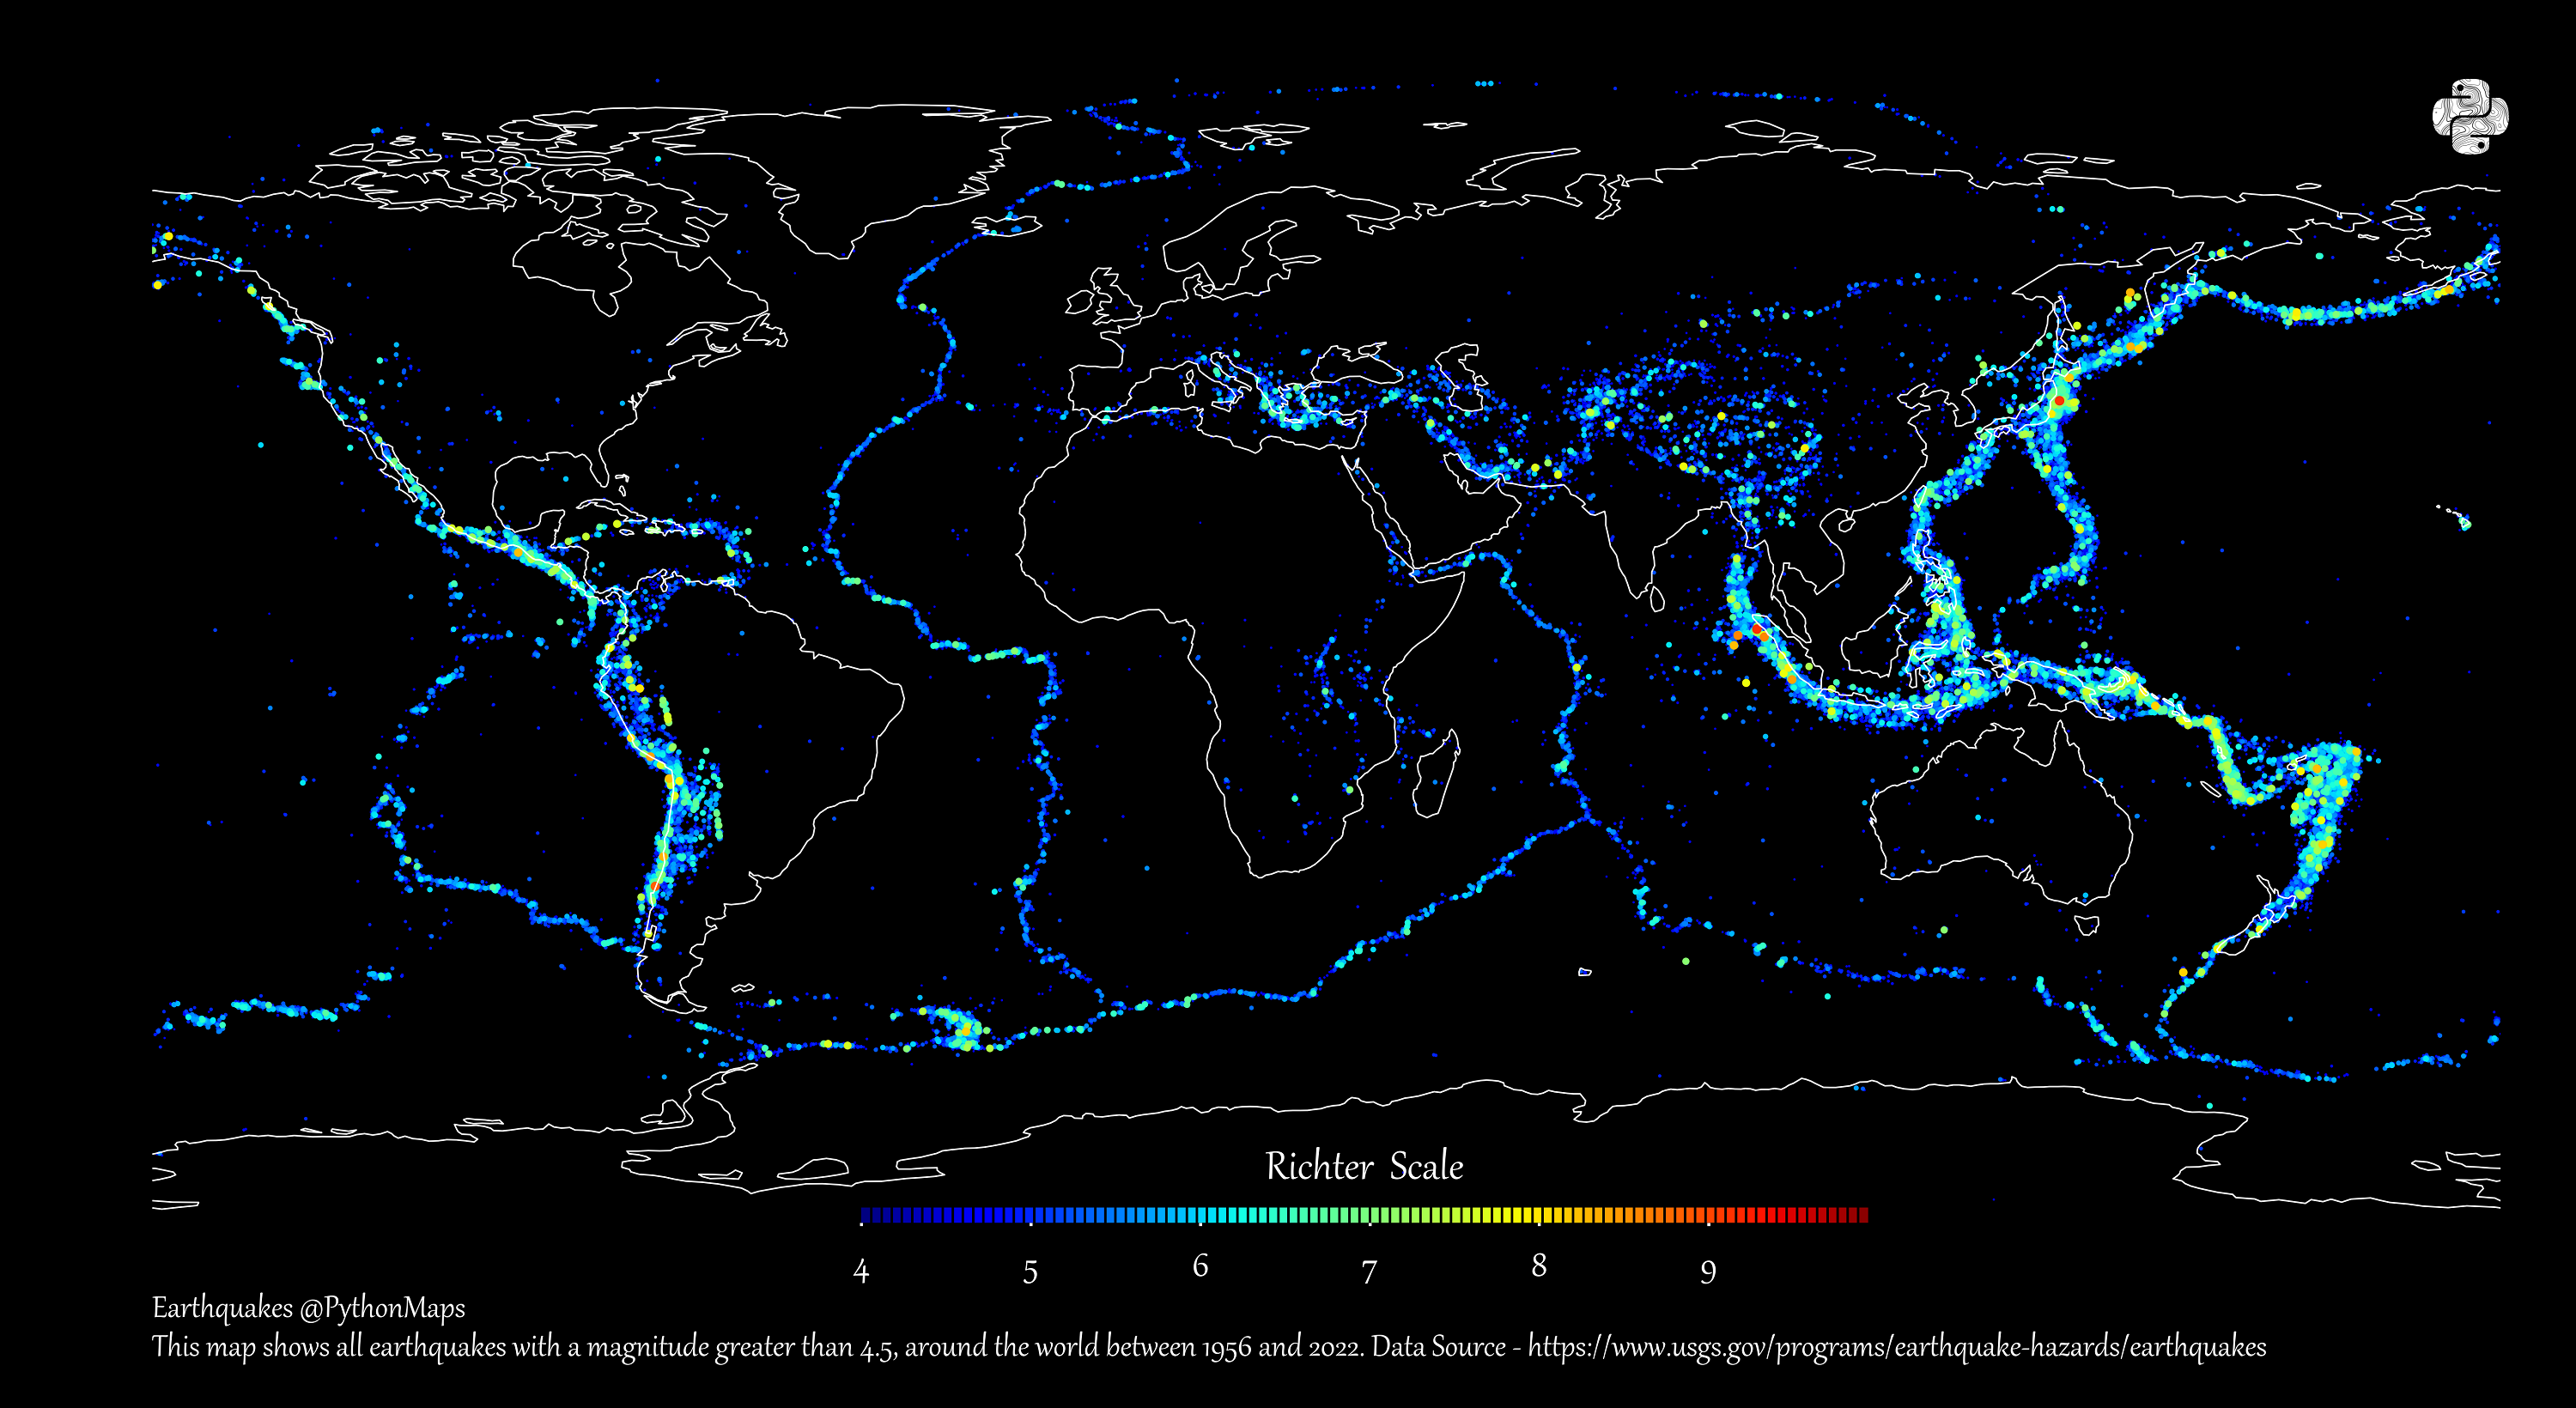 This map highlights the epicenters of earthquakes on record between 1956 and 2022.